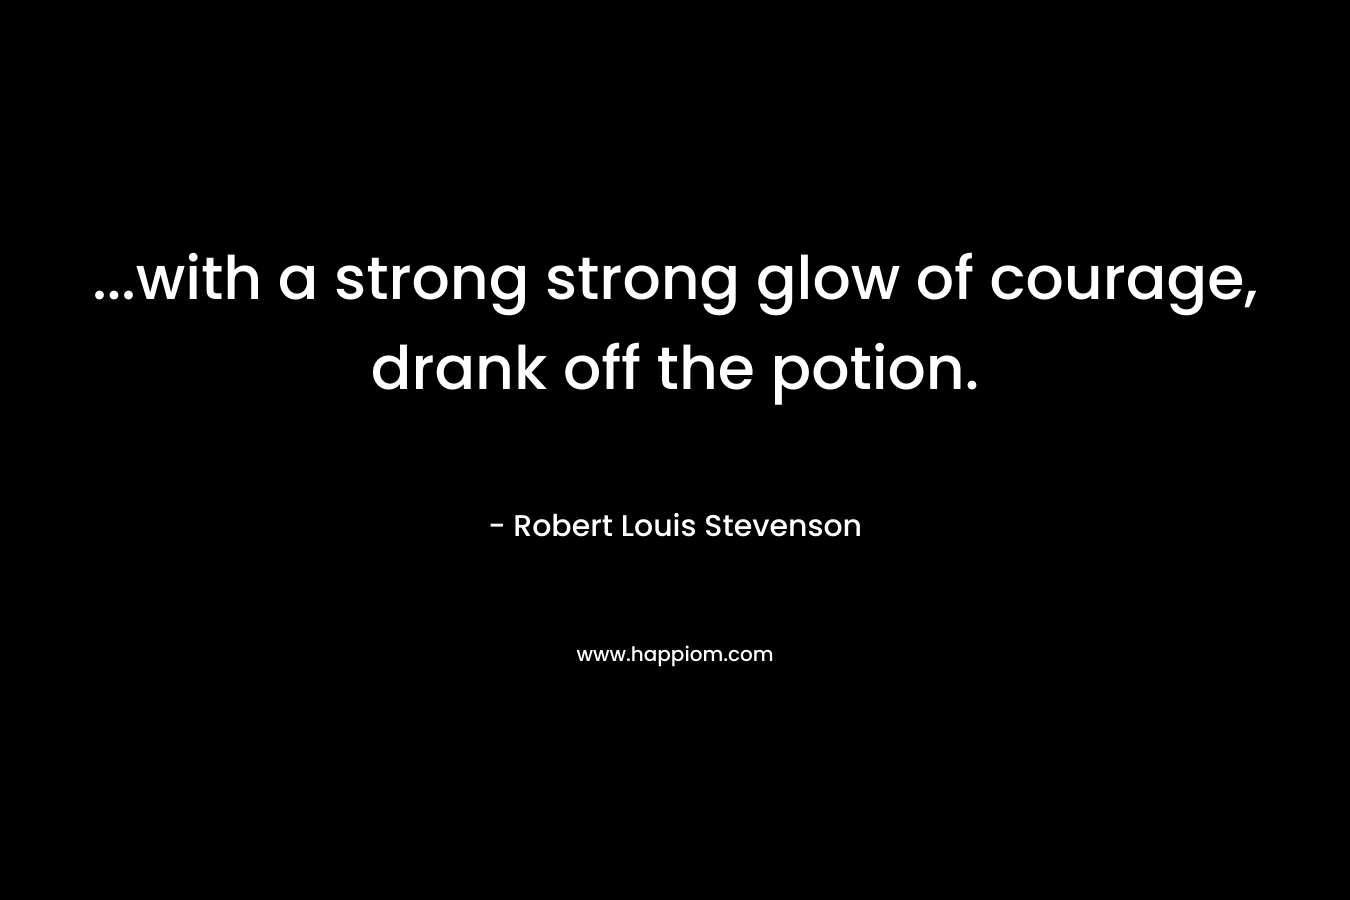 …with a strong strong glow of courage, drank off the potion. – Robert Louis Stevenson